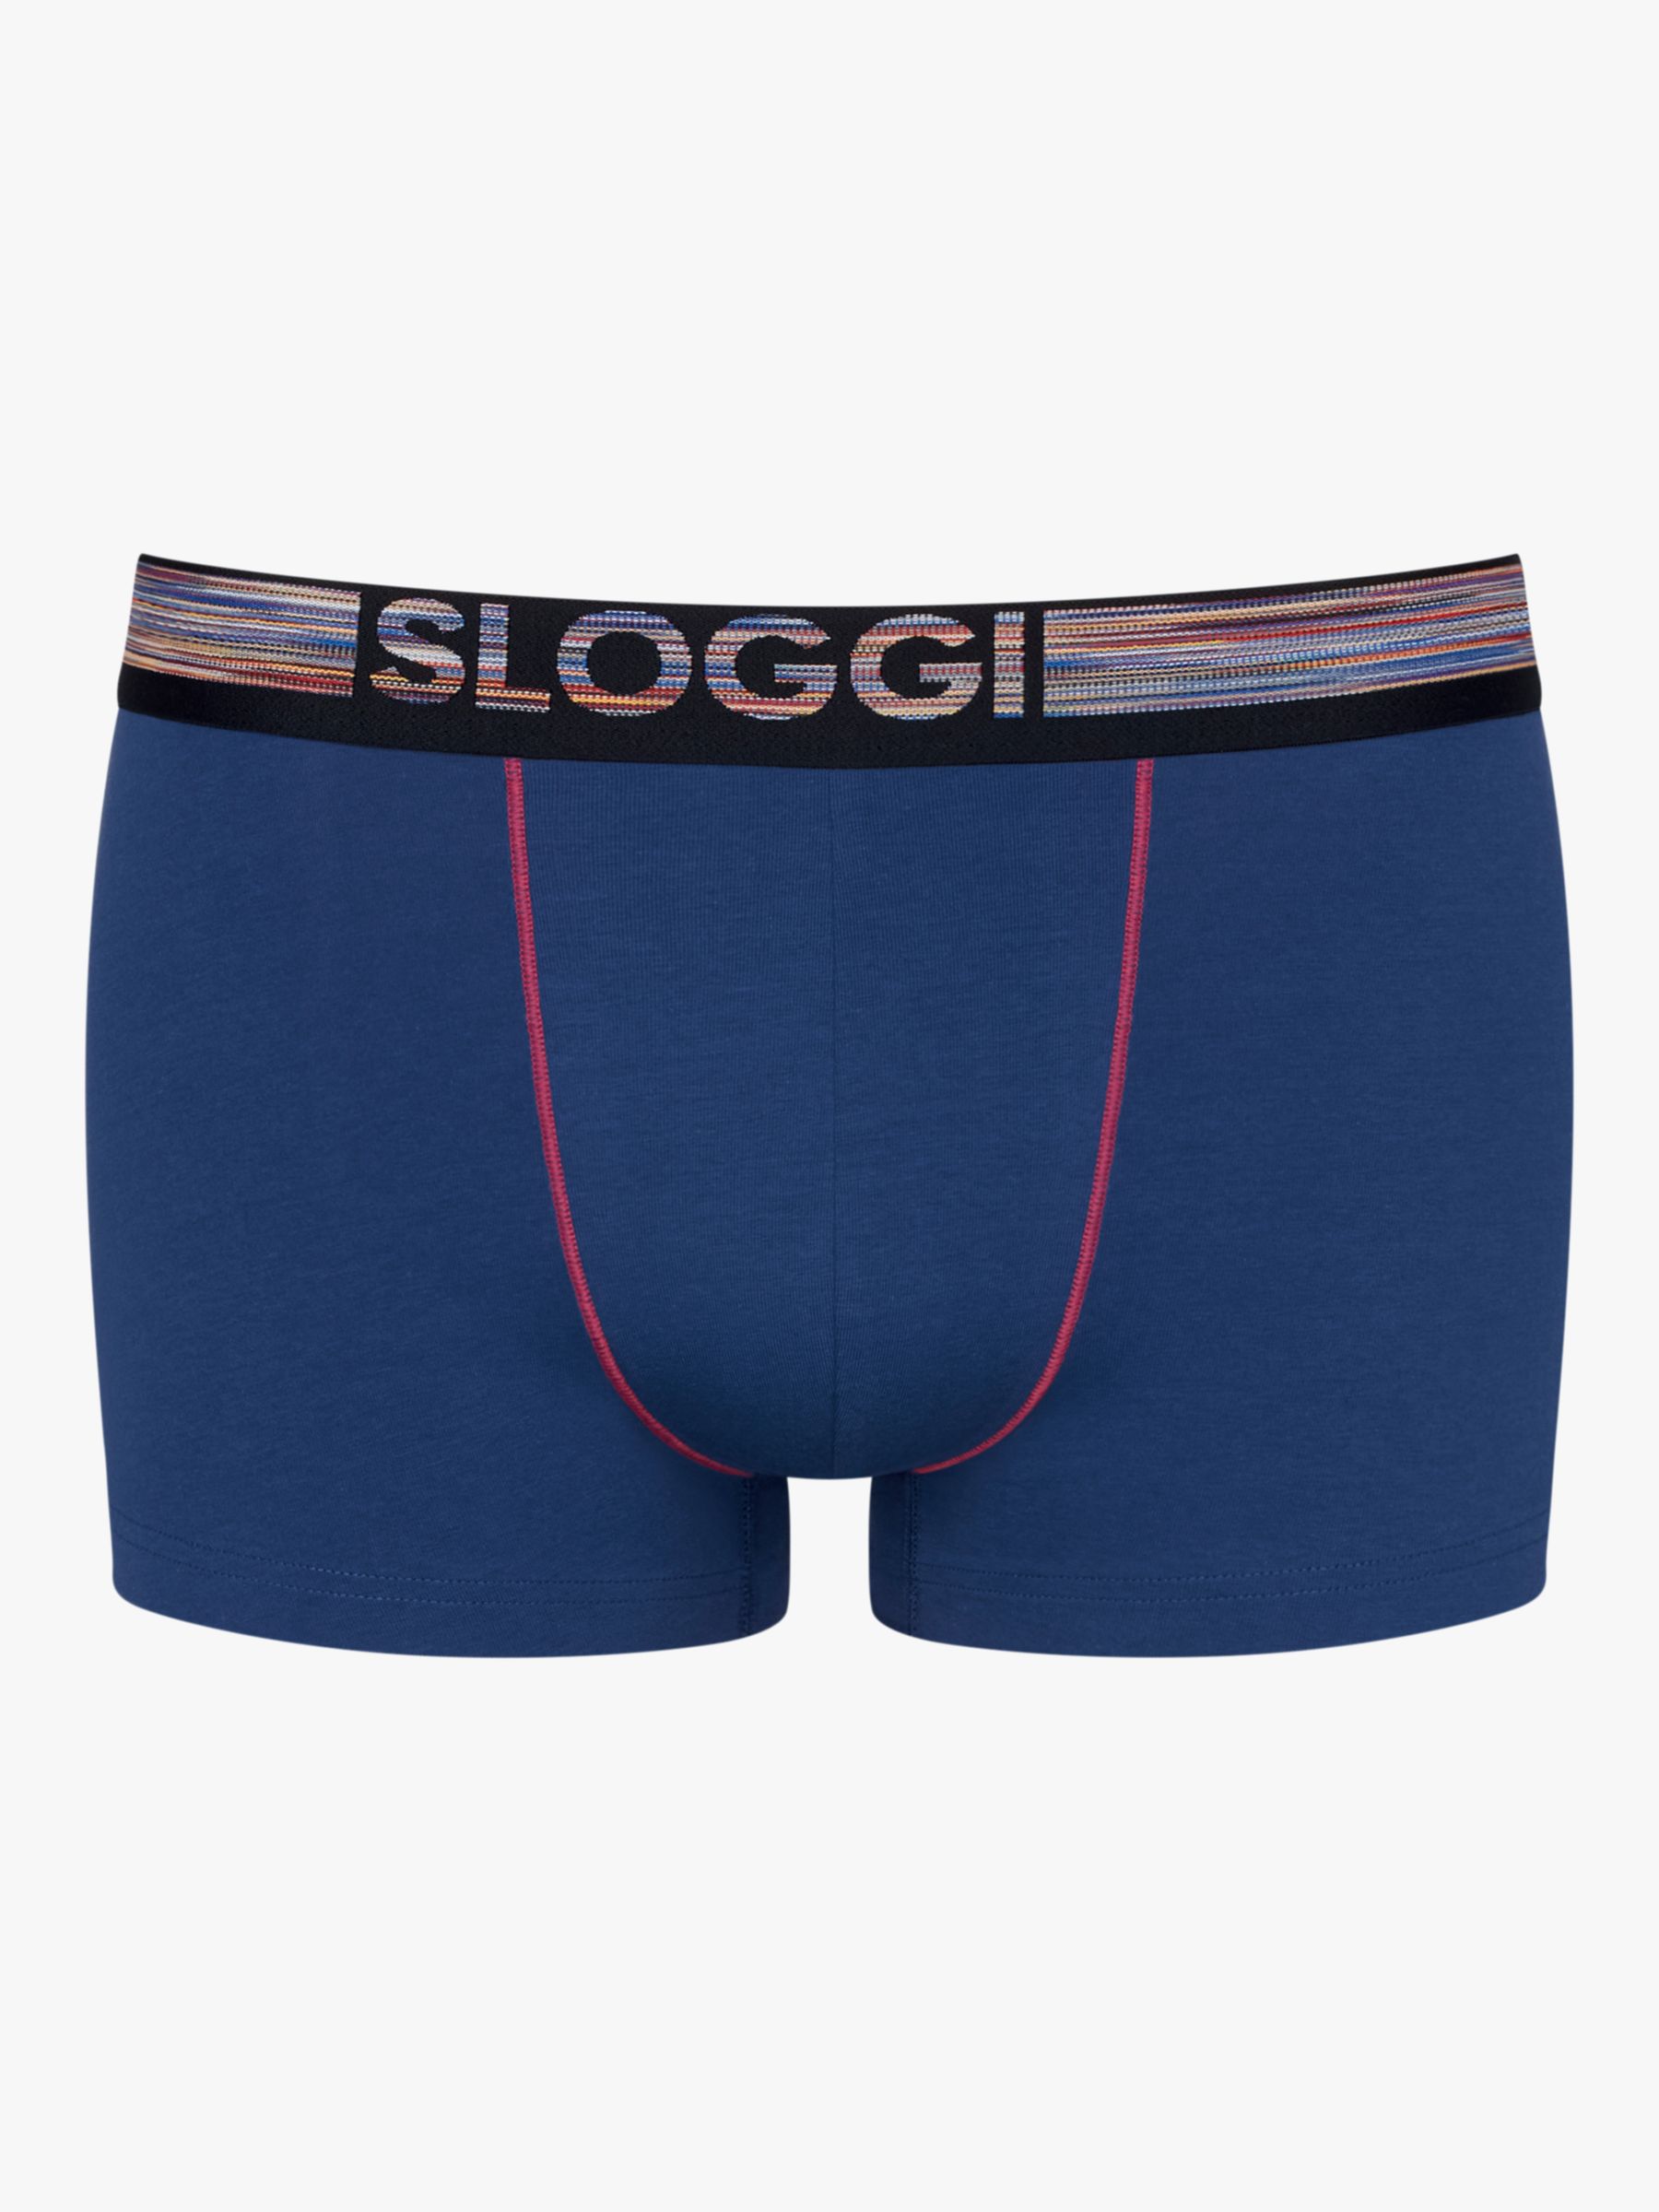 sloggi GO ABC Natural Cotton Stretch Hipster Trunks, Pack of 6, Twilight Blue, XXL